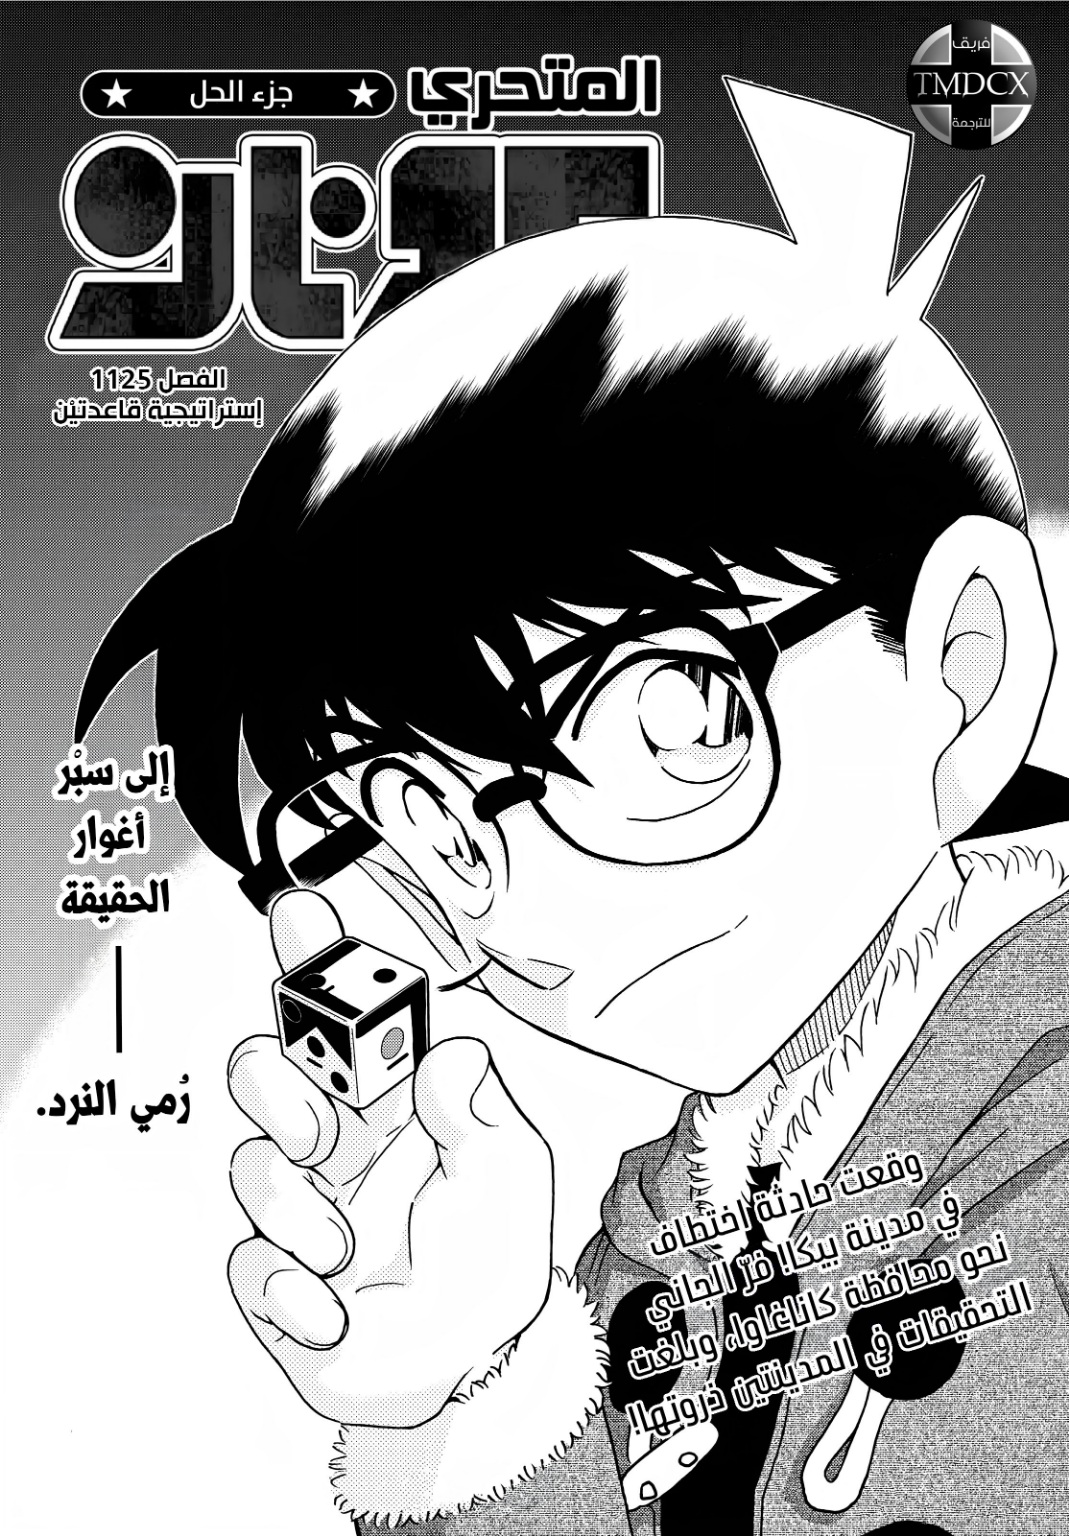 Detective Conan: Chapter 1125 - Page 1